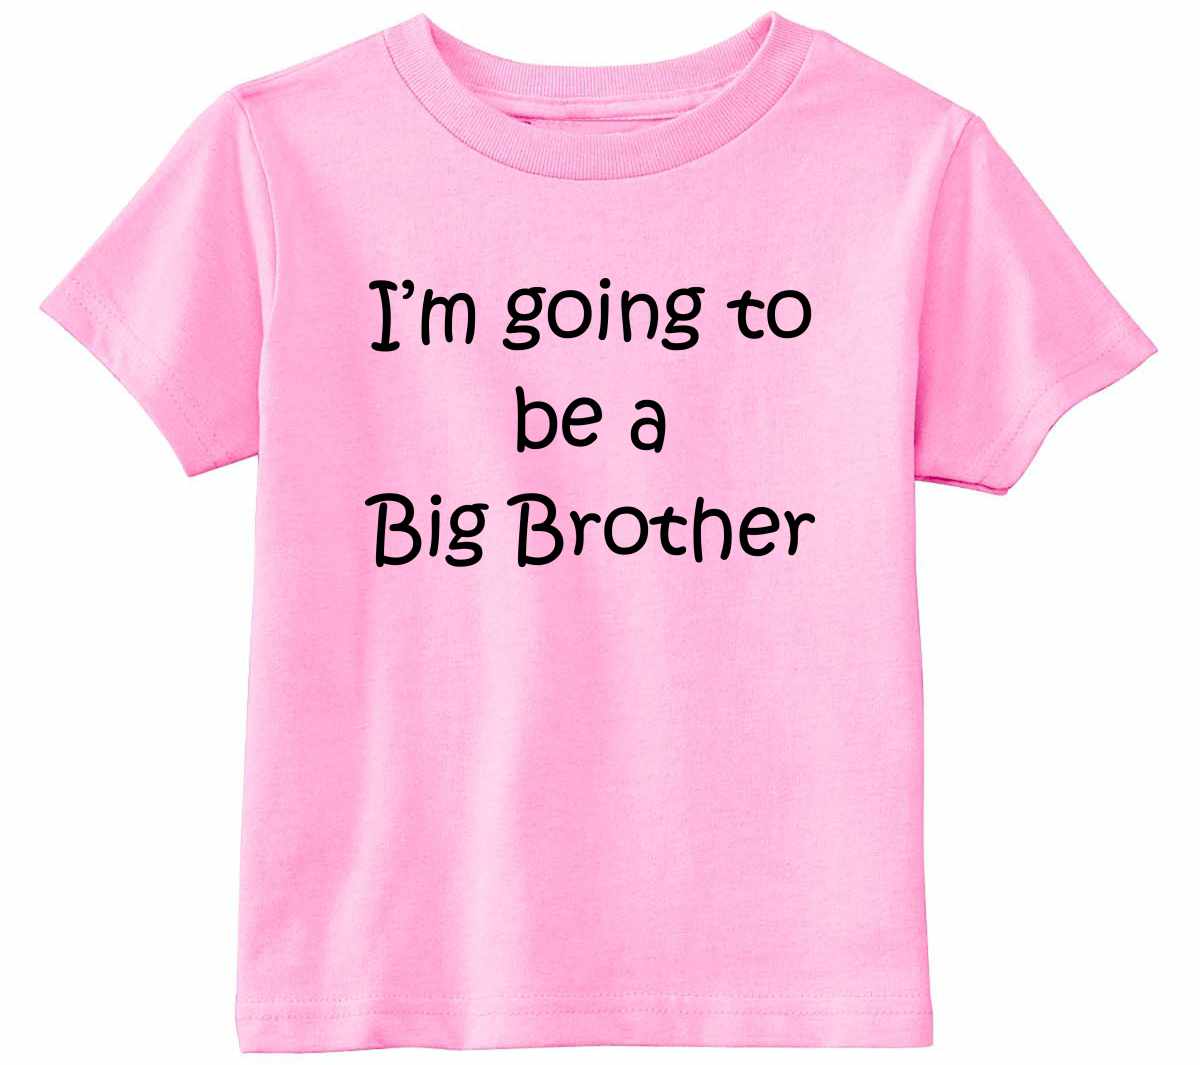 I'M GOING TO BE A BIG BROTHER Infant/Toddler  (#517-7)